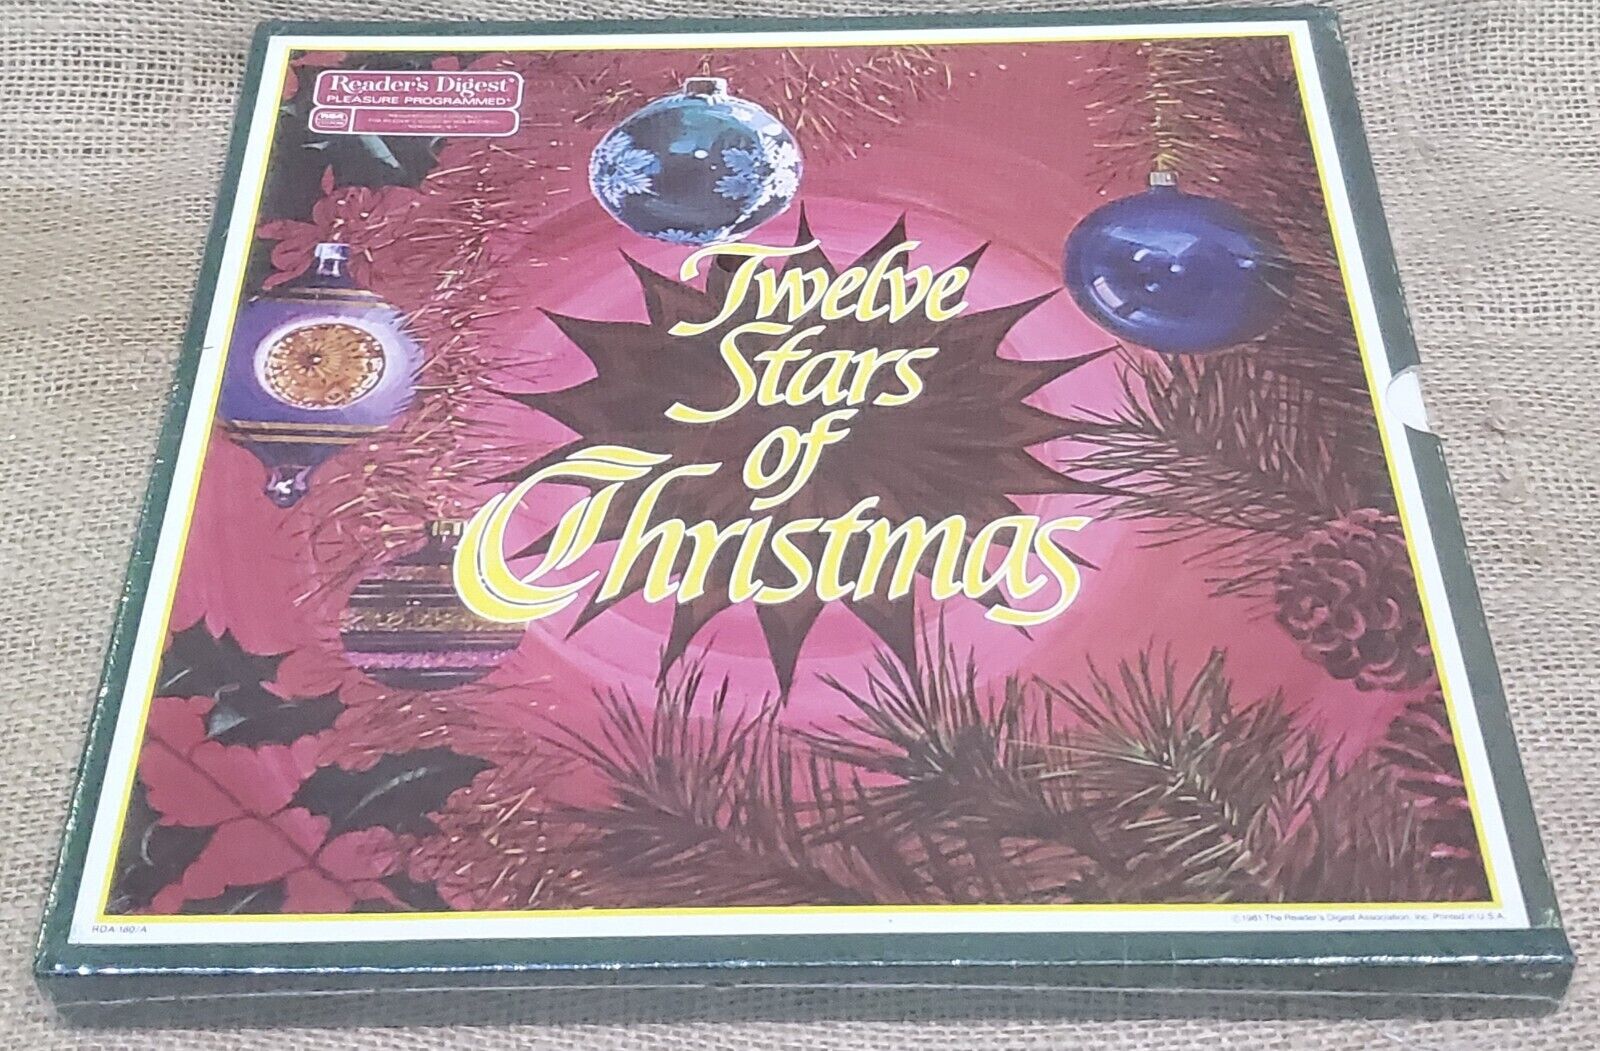 Twelve Stars of Christmas 6 LPs Record Set Of Classics By 12 Star Performers NEW